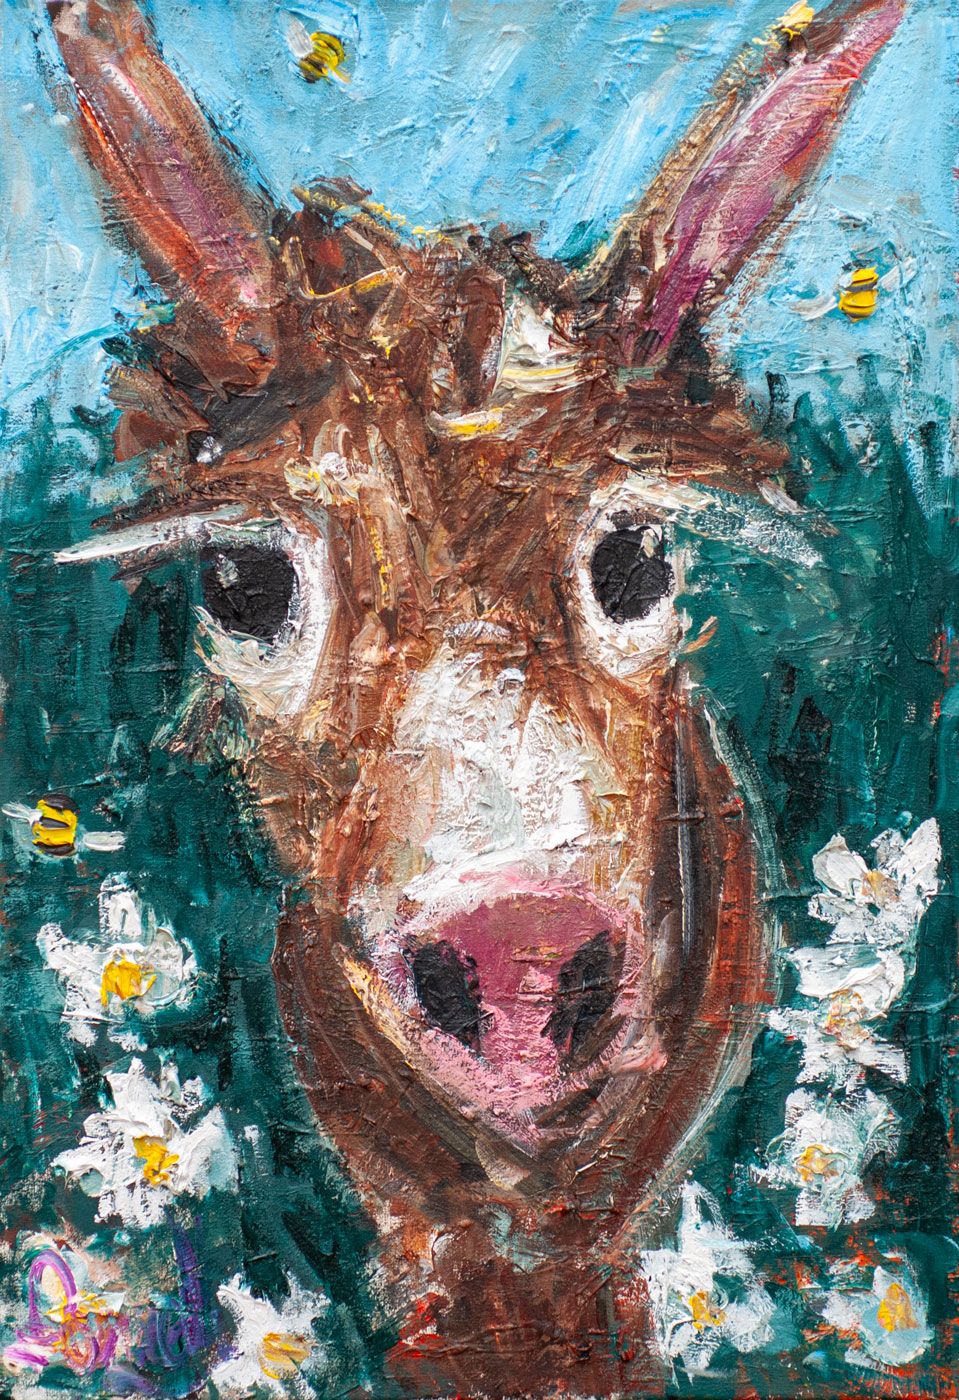 Daisy the Donkey by Deborah Donnelly